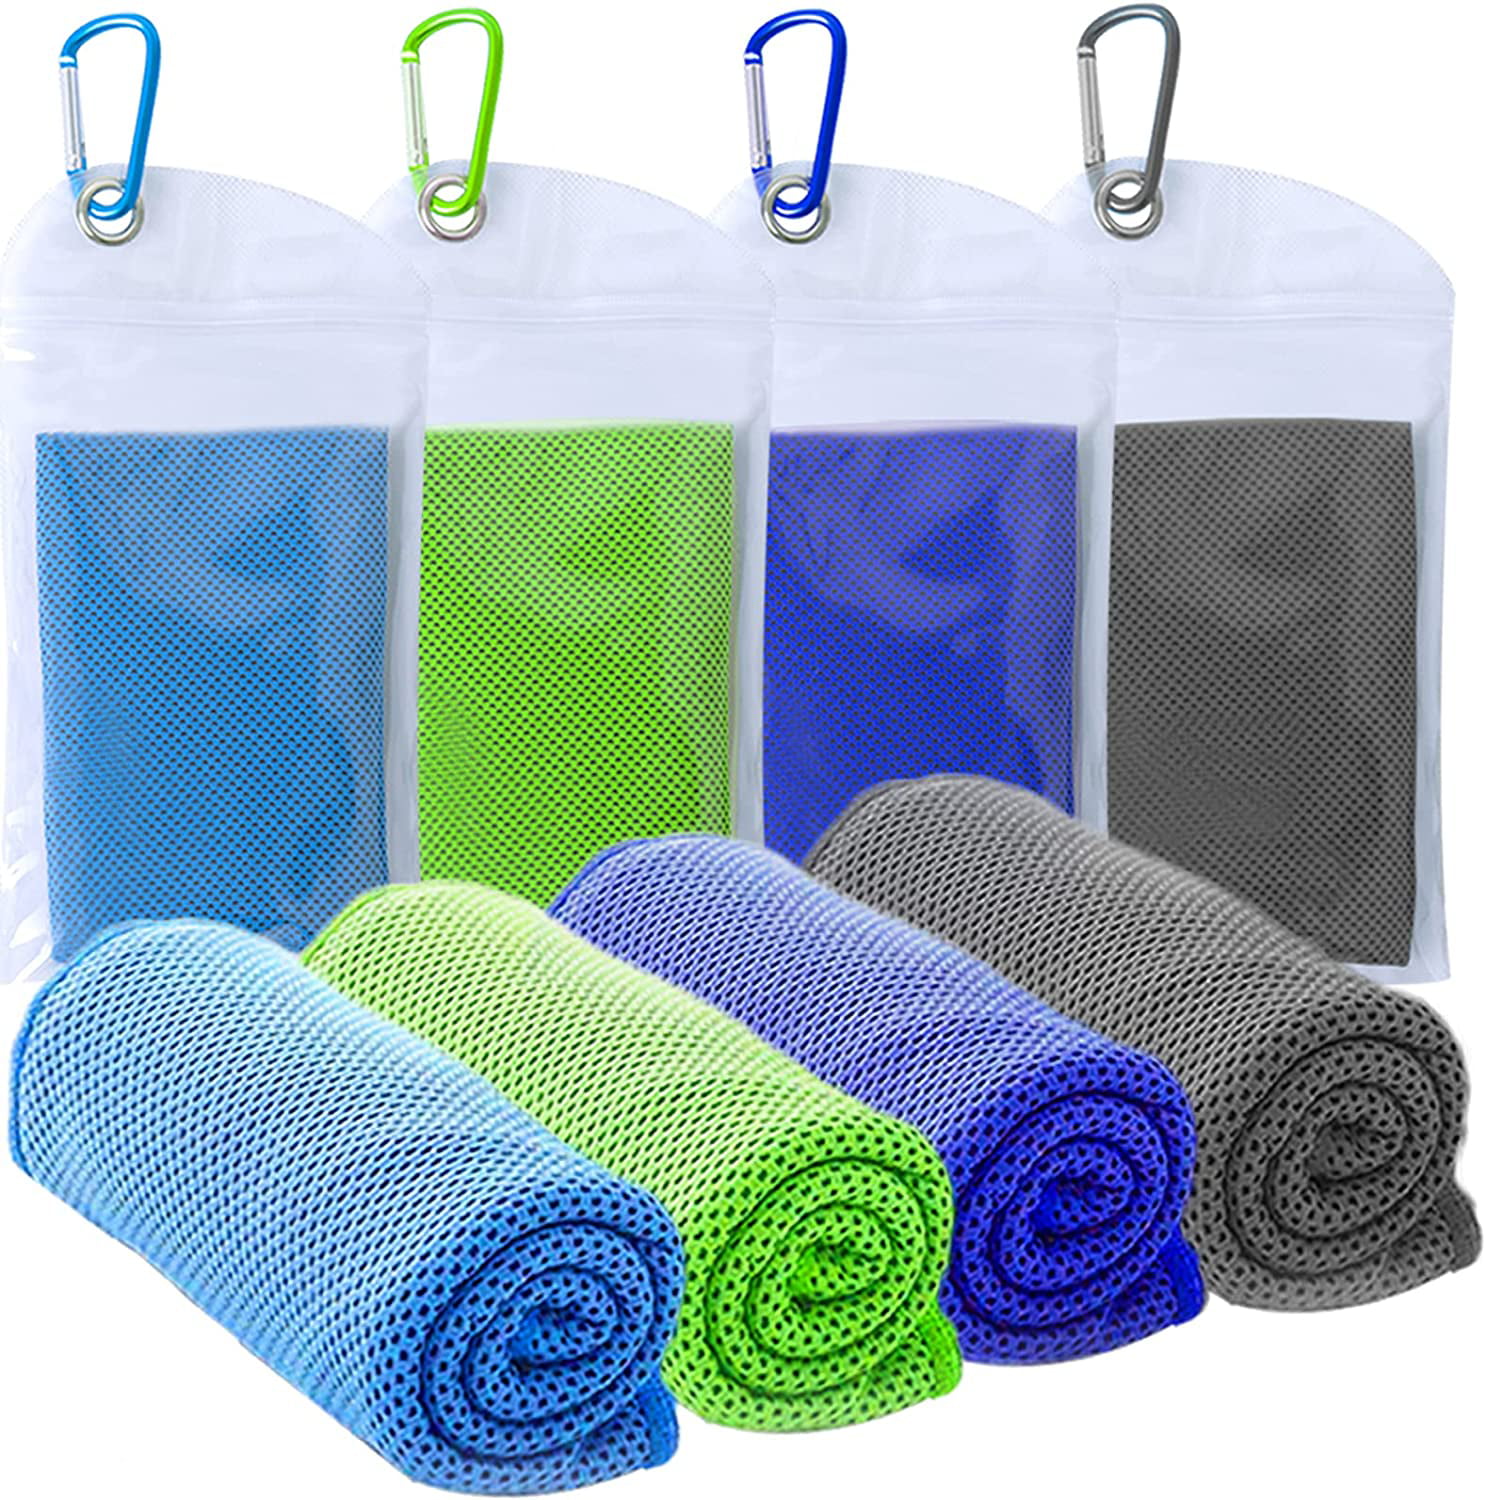 Ice Instant Cooling Sports Towel Microfibre Sweat for Gym Yoga Camping Travel 